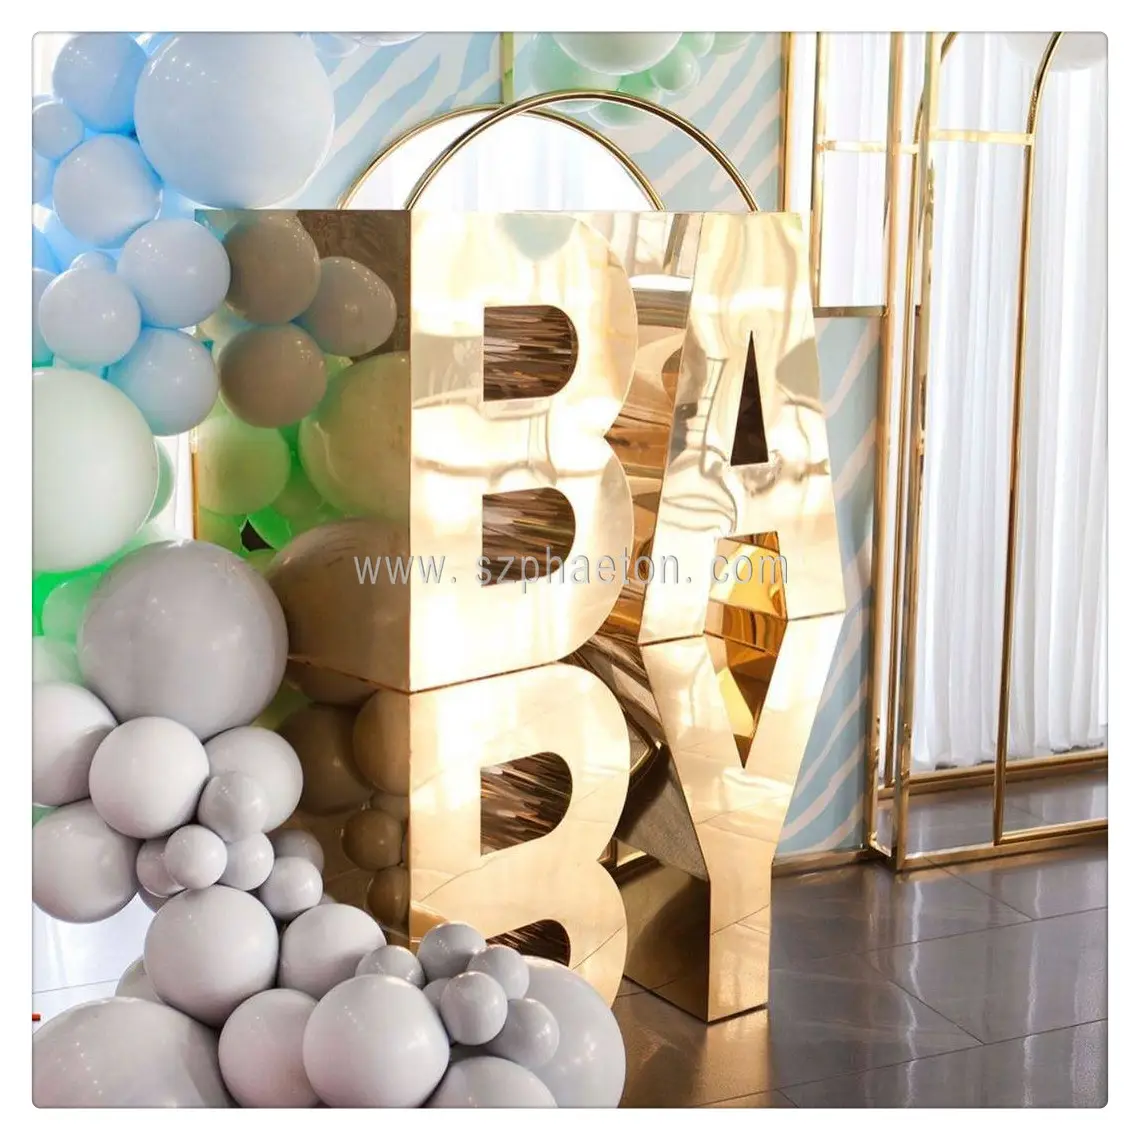 Party supplies letter table for cake / dessert display, mirror gold letter table BABY for baby shower decoration